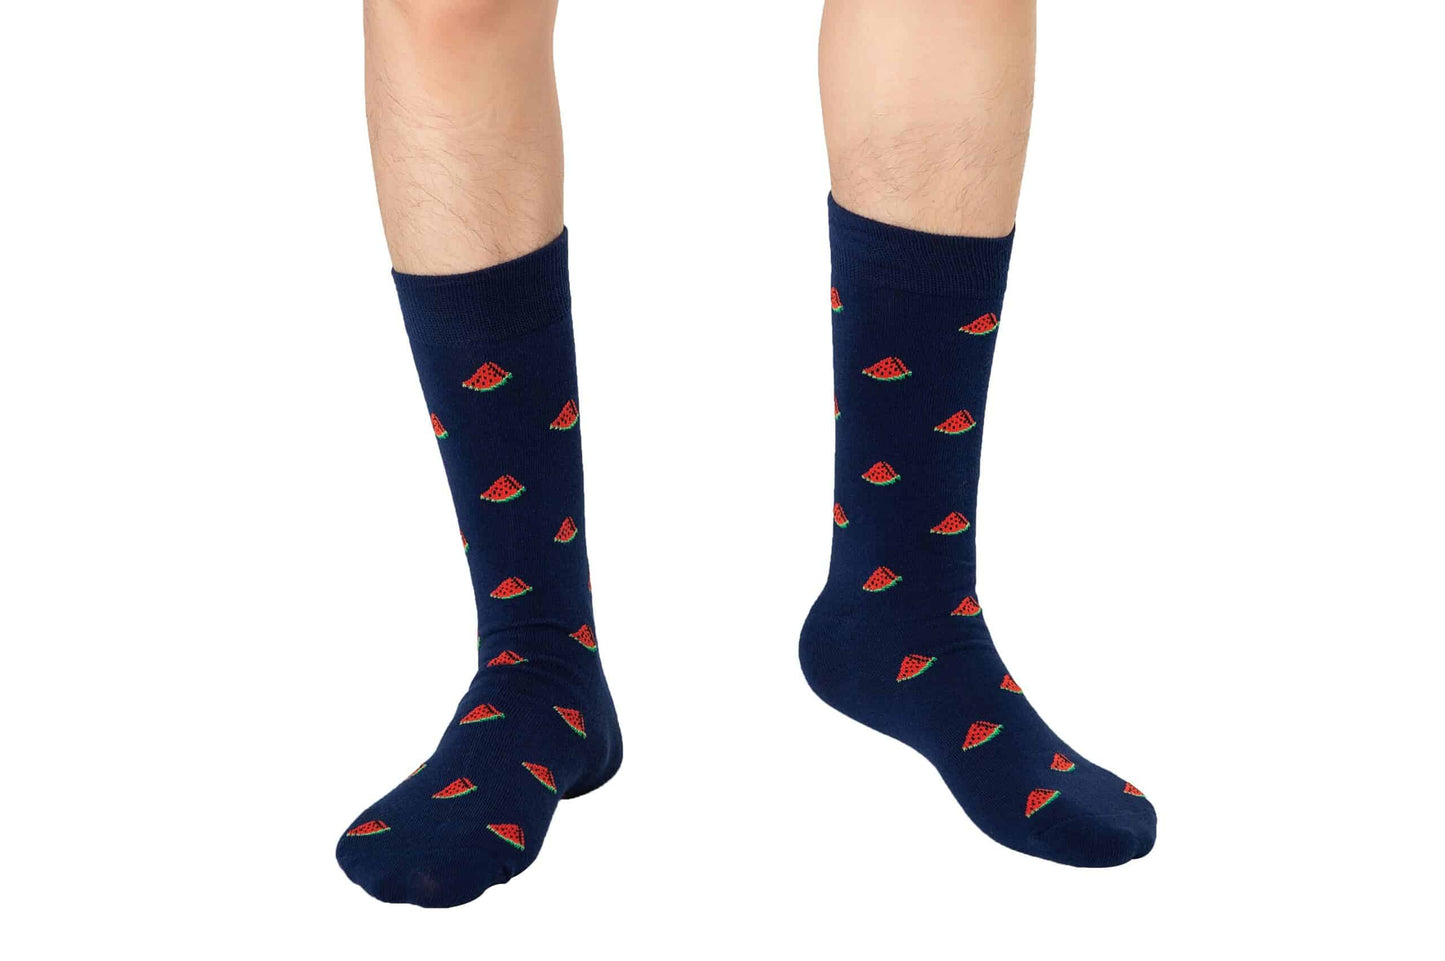 Person wearing Watermelon Socks steps out in joyful fashion, each juicy detail of the design adding a playful touch.